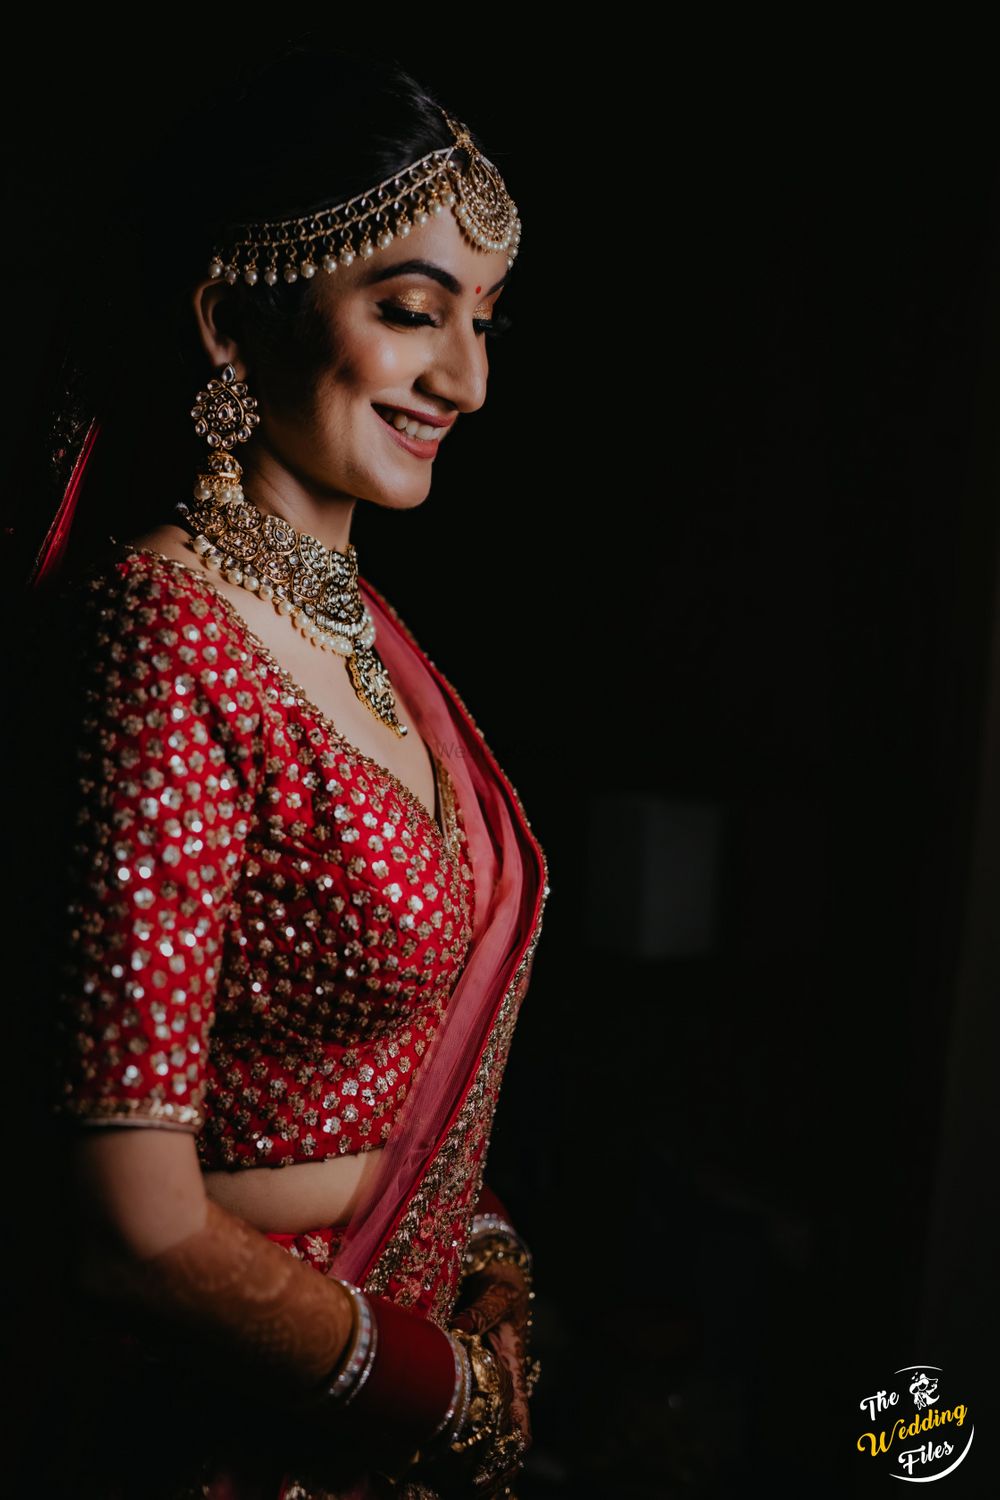 Photo of Candid shot of a smiling bride in a red lehenga.